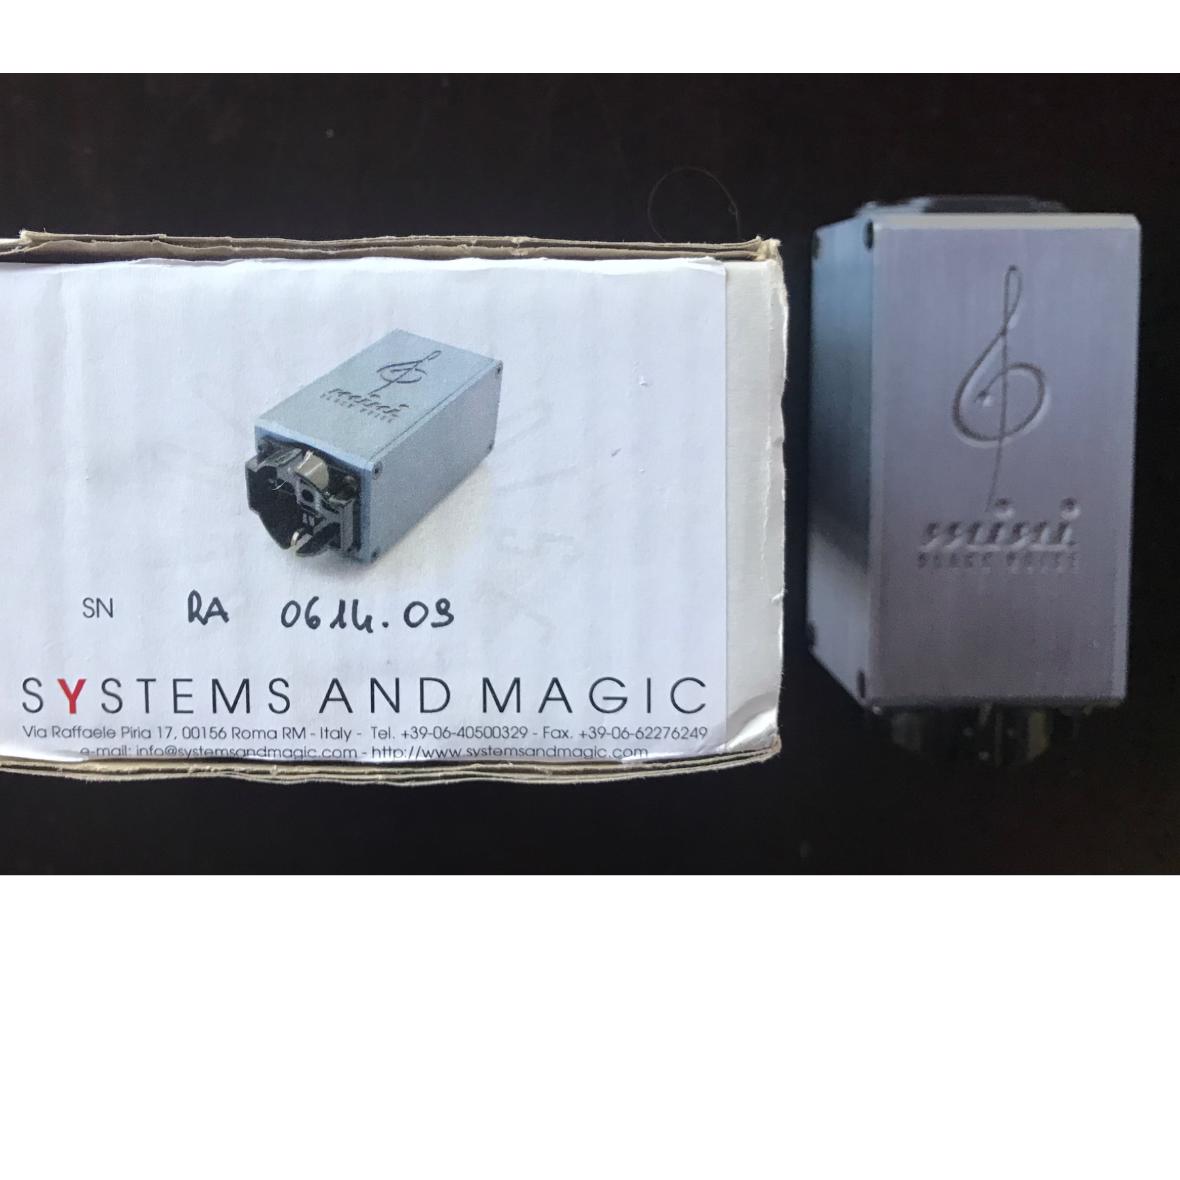  systems and magic mini black noise  audio power filter .